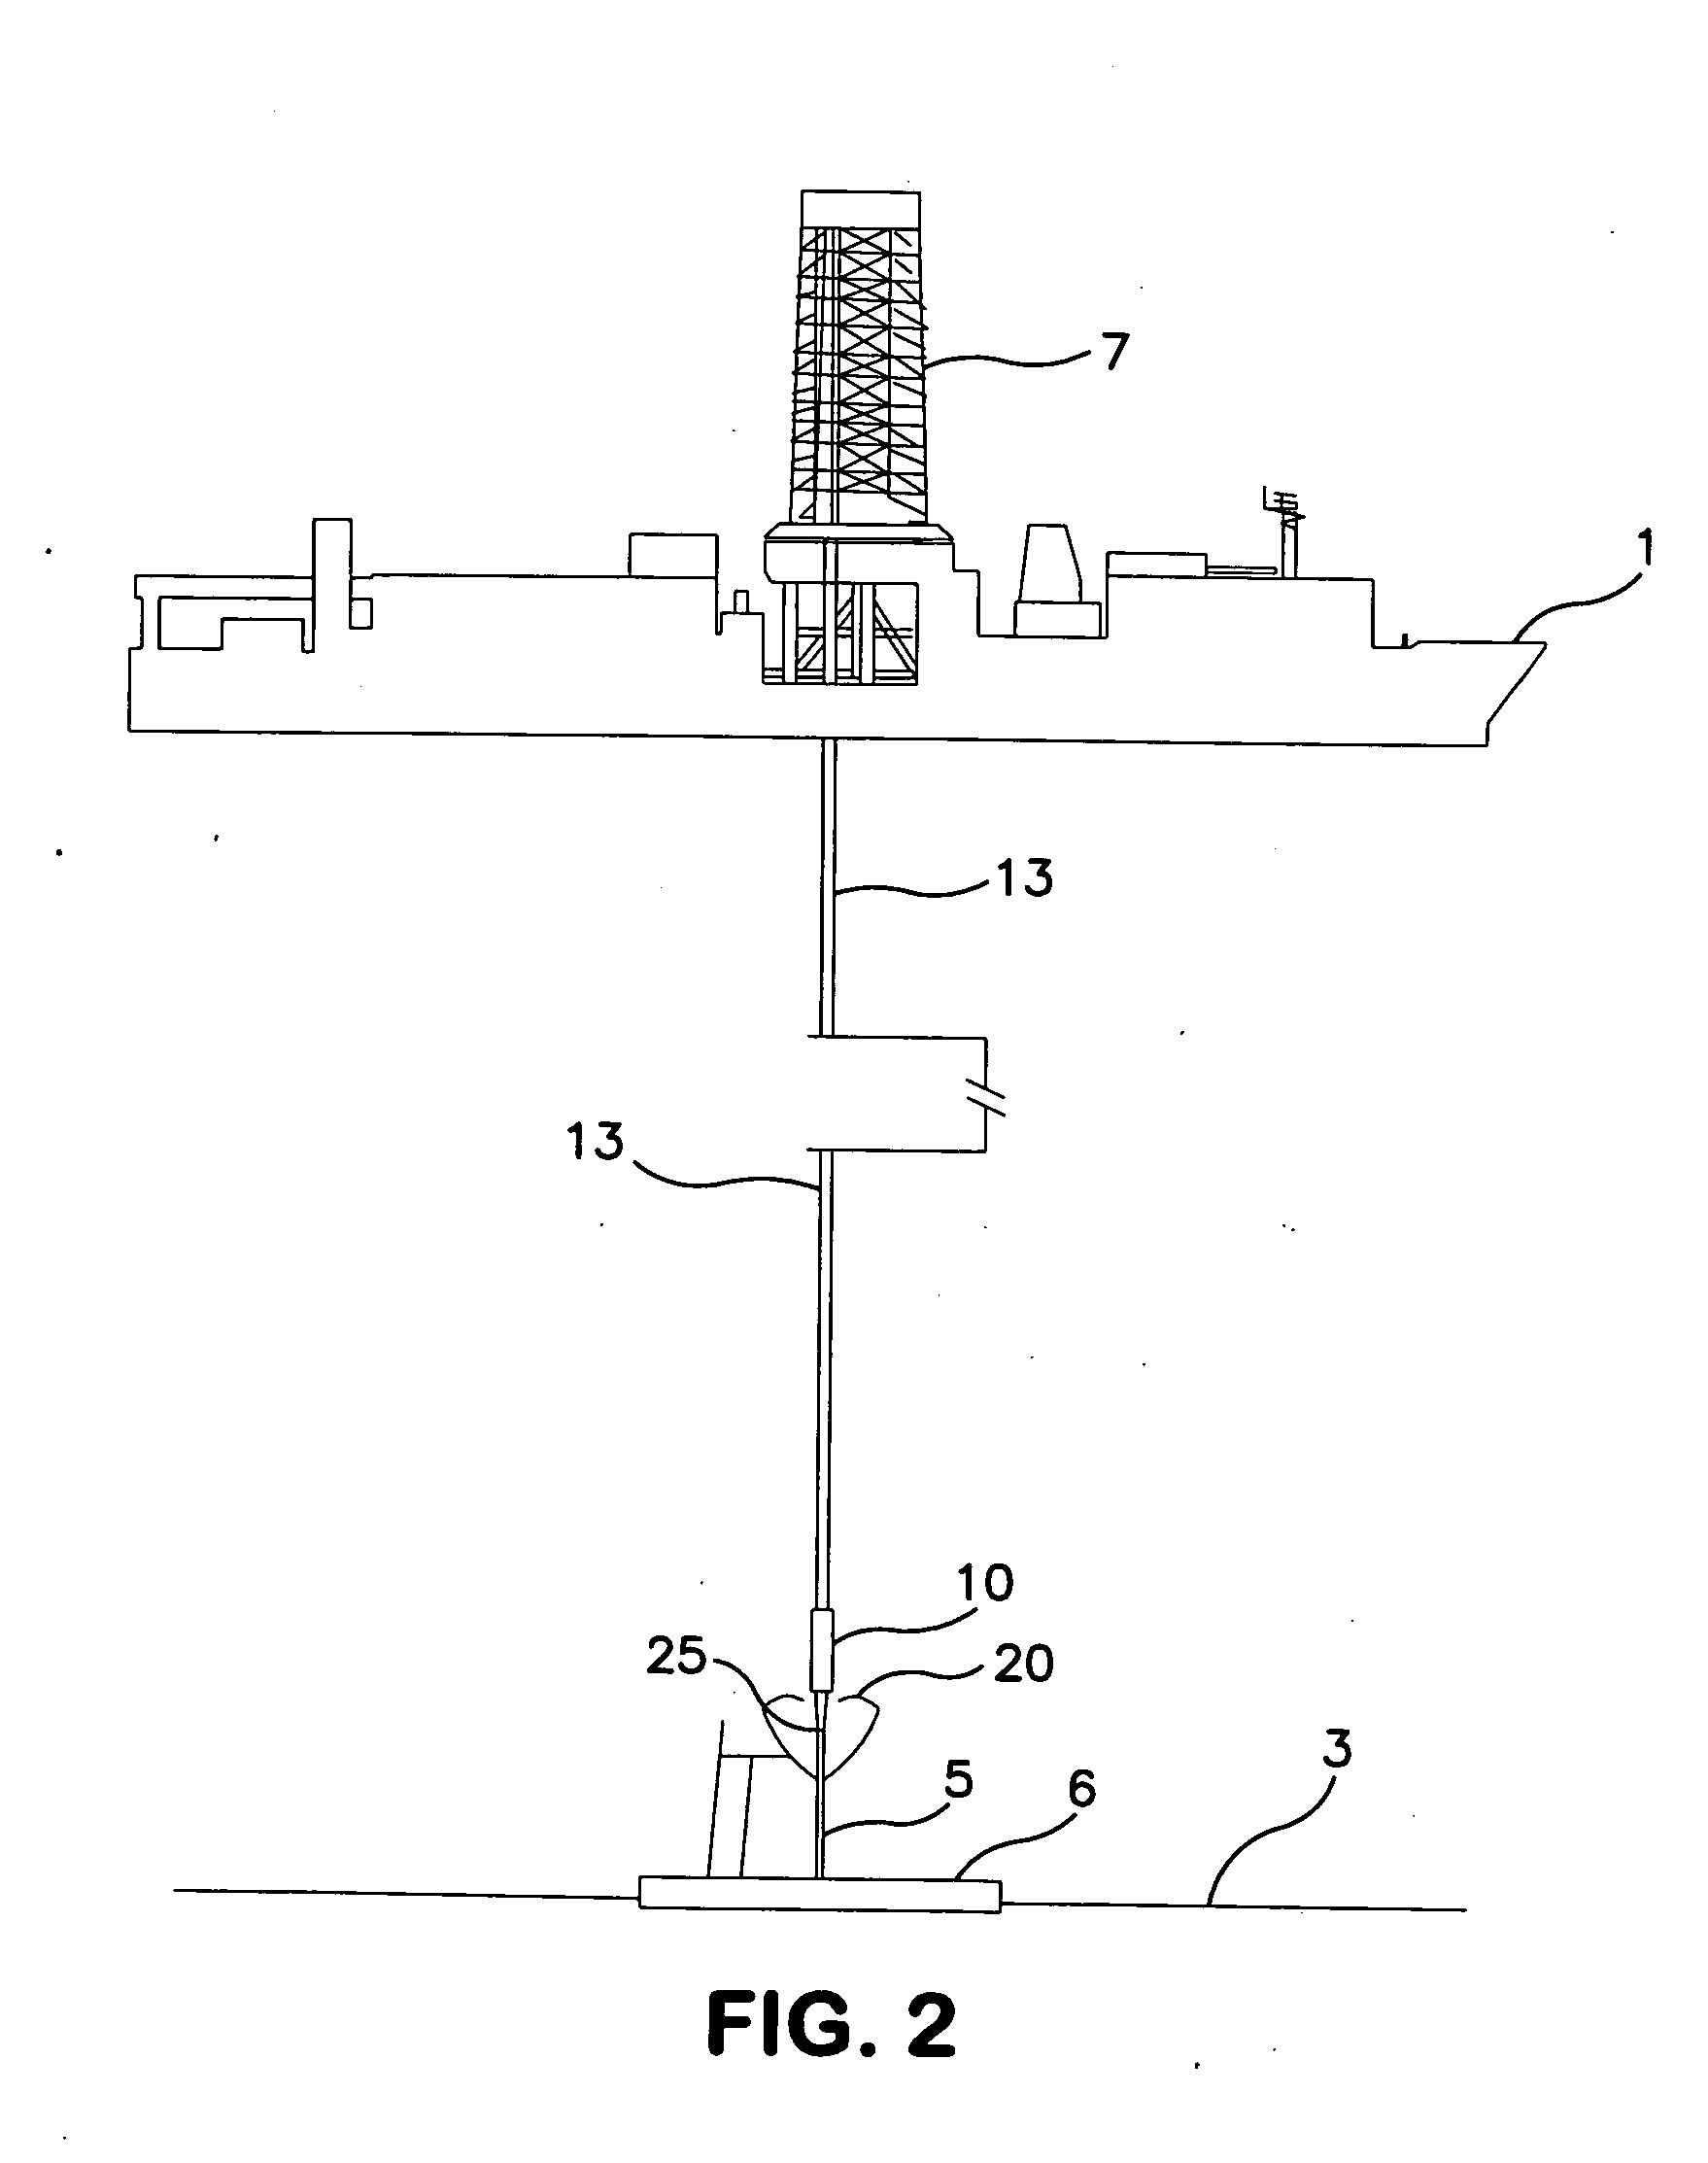 Method And Apparatus For Controlling The Flow Of Fluids From A Well Below The Surface Of The Water